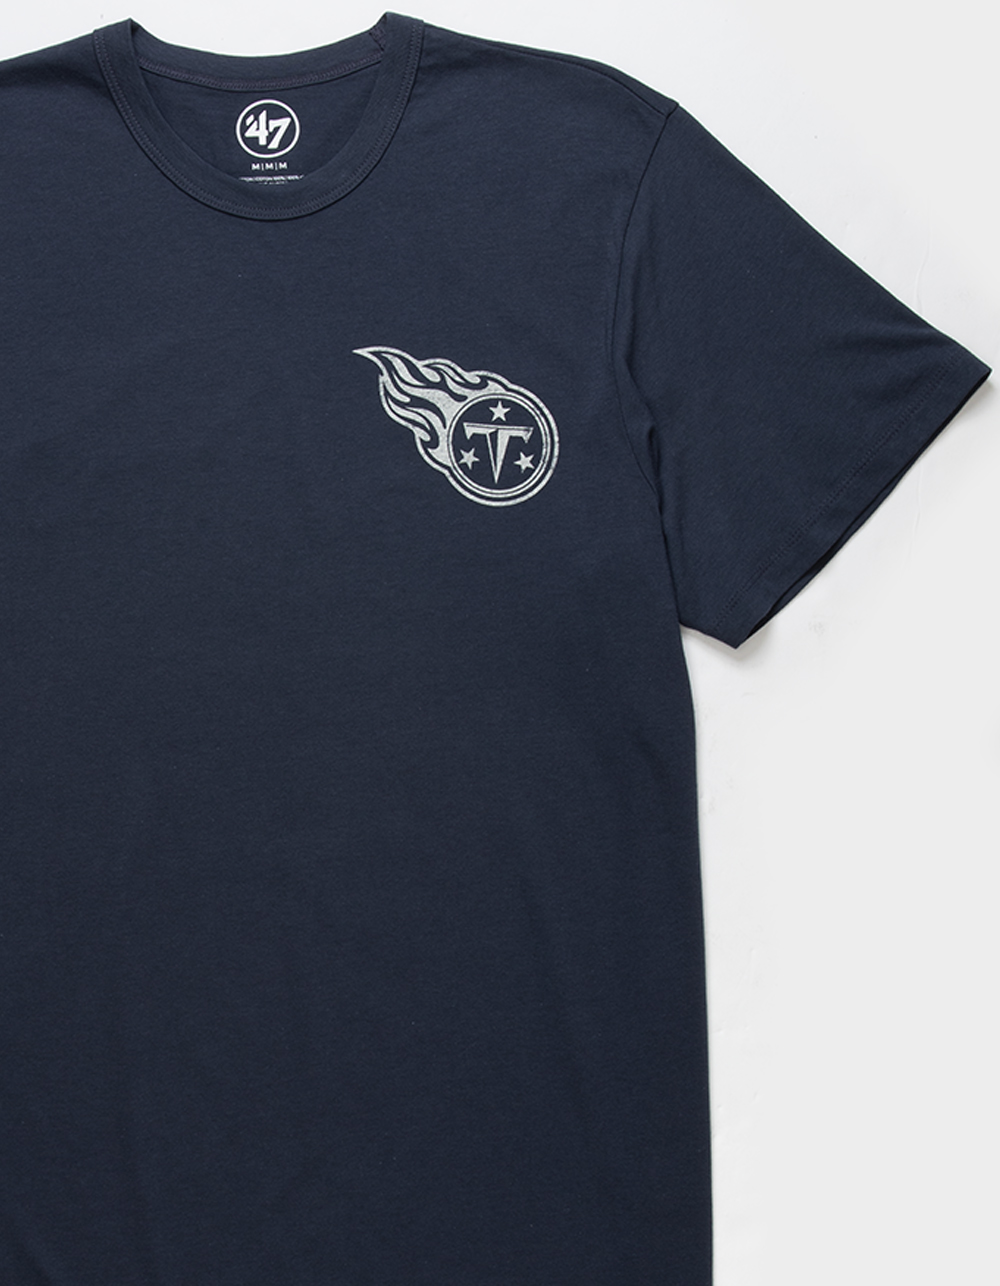 47 Brand Tennessee Titans Tee - Navy - Small